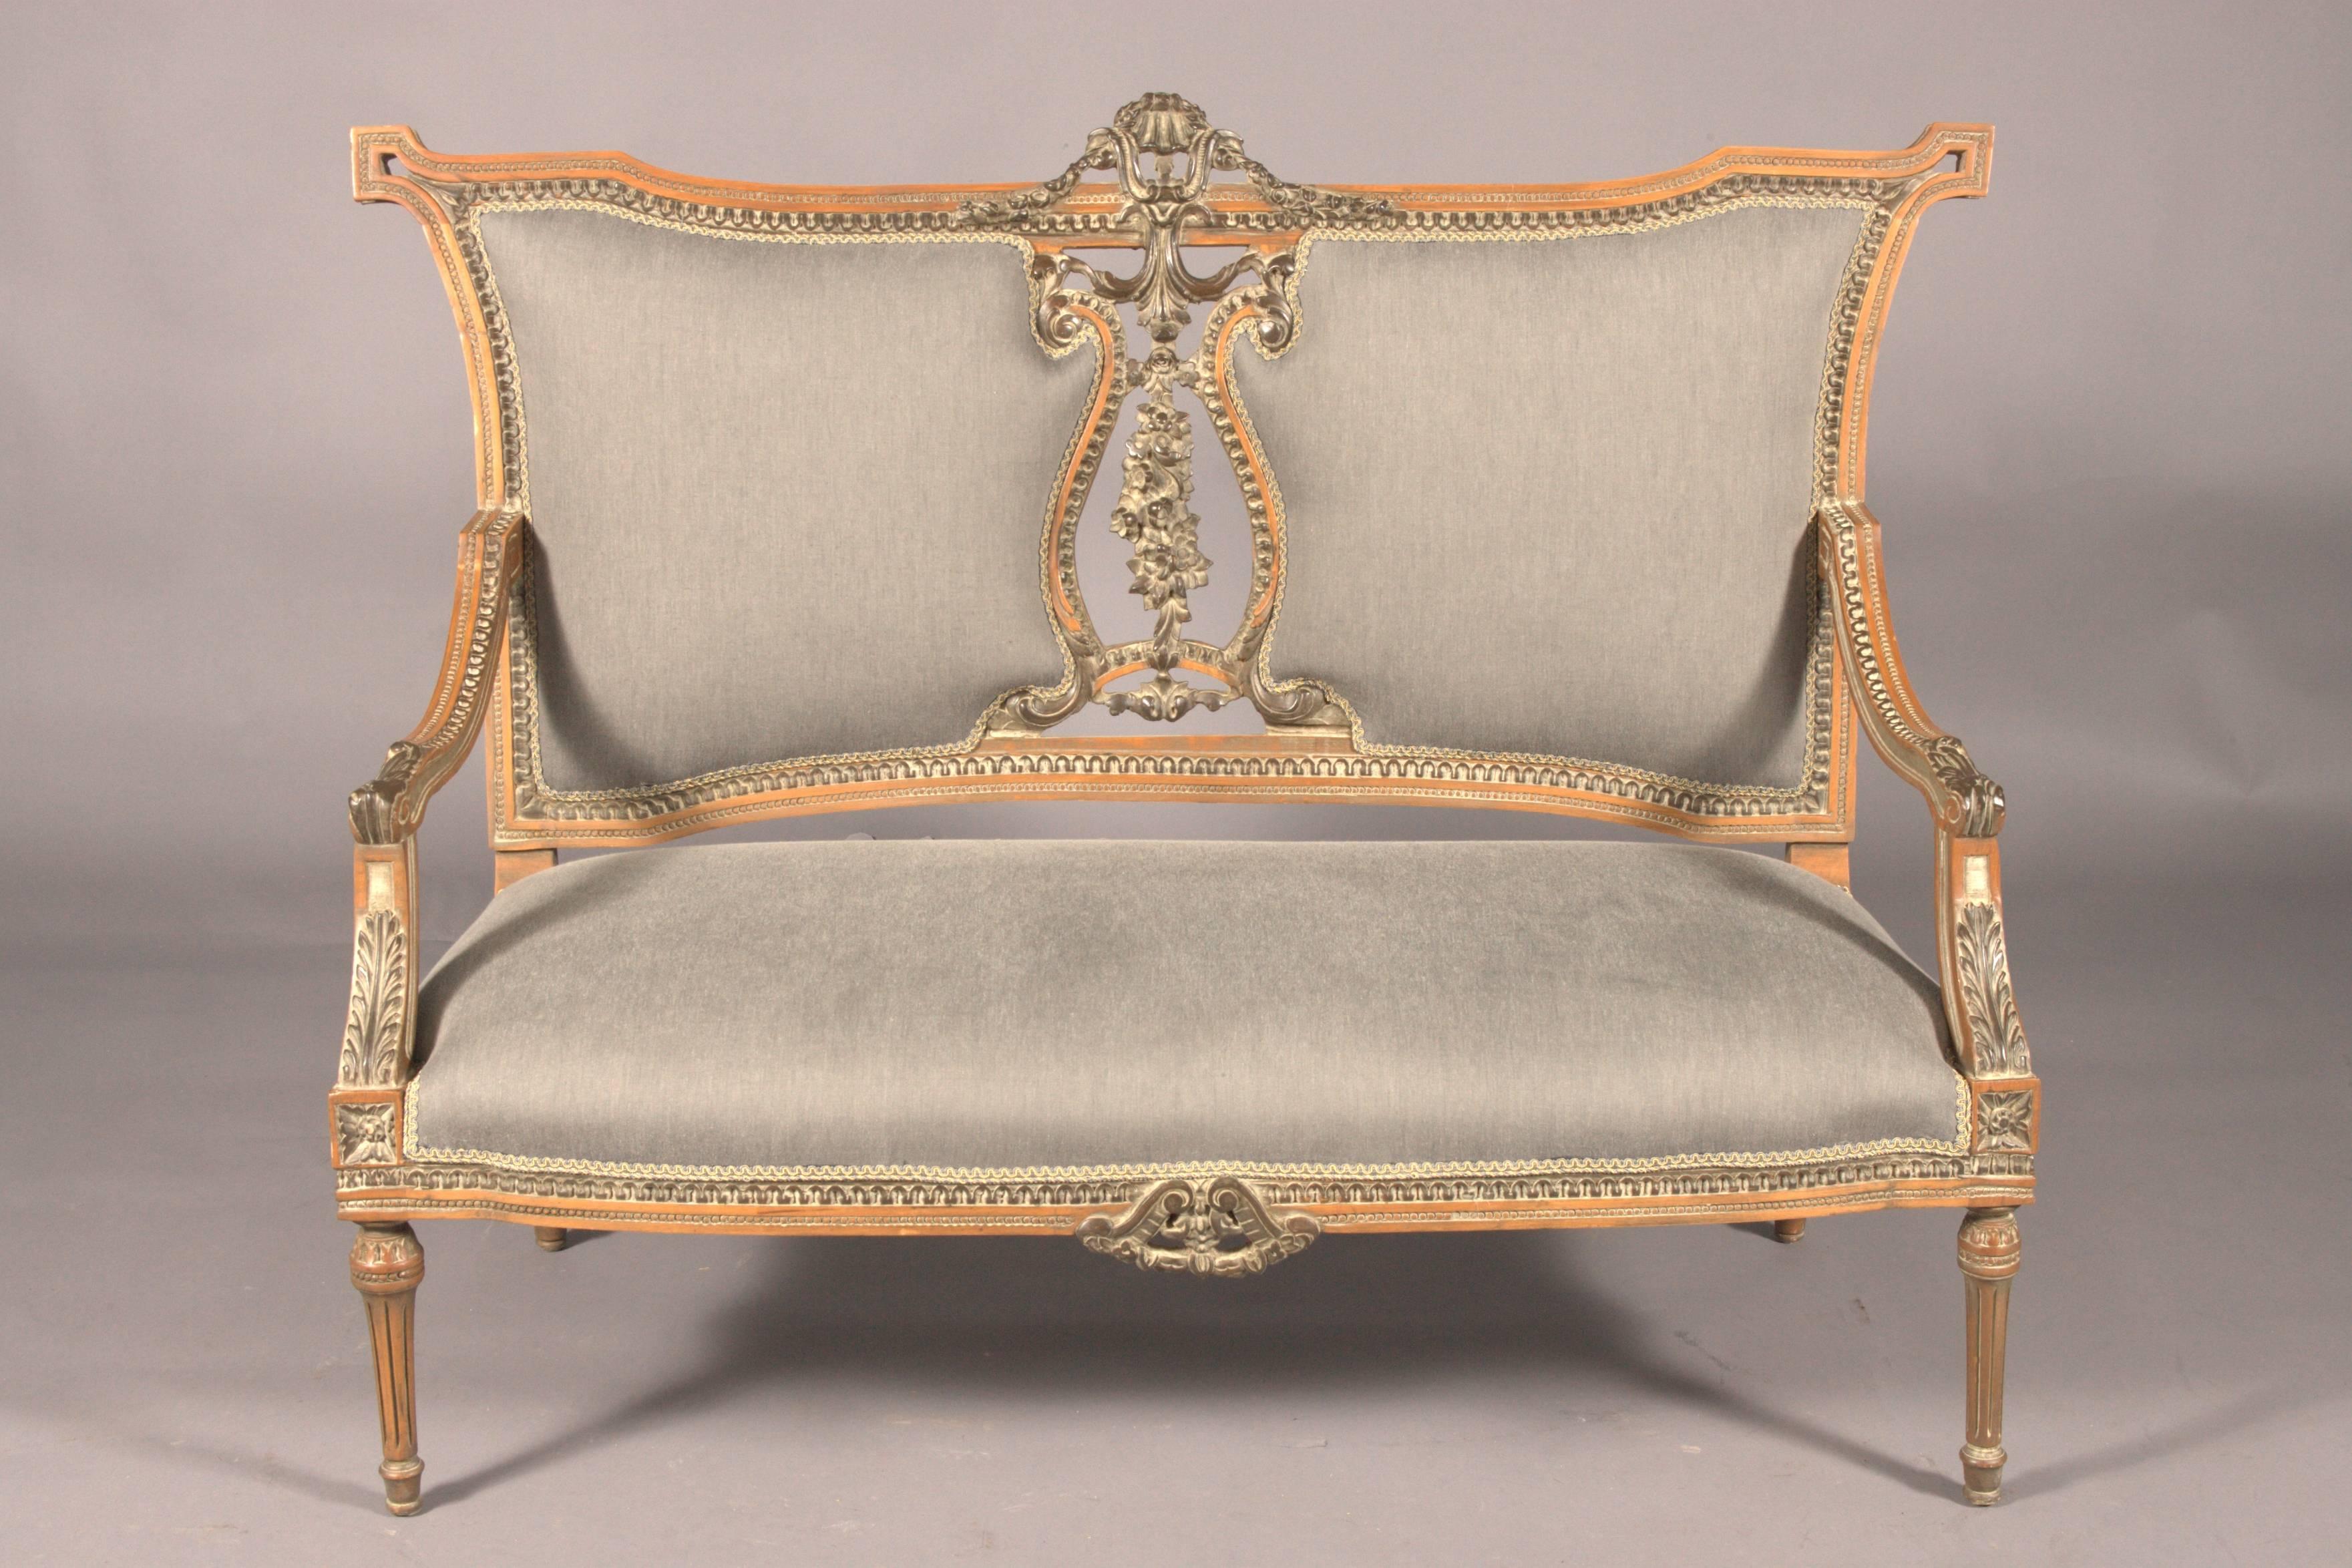 Hand-Crafted 20th Century French Seating Group in the Louis Seize Style Beechwood